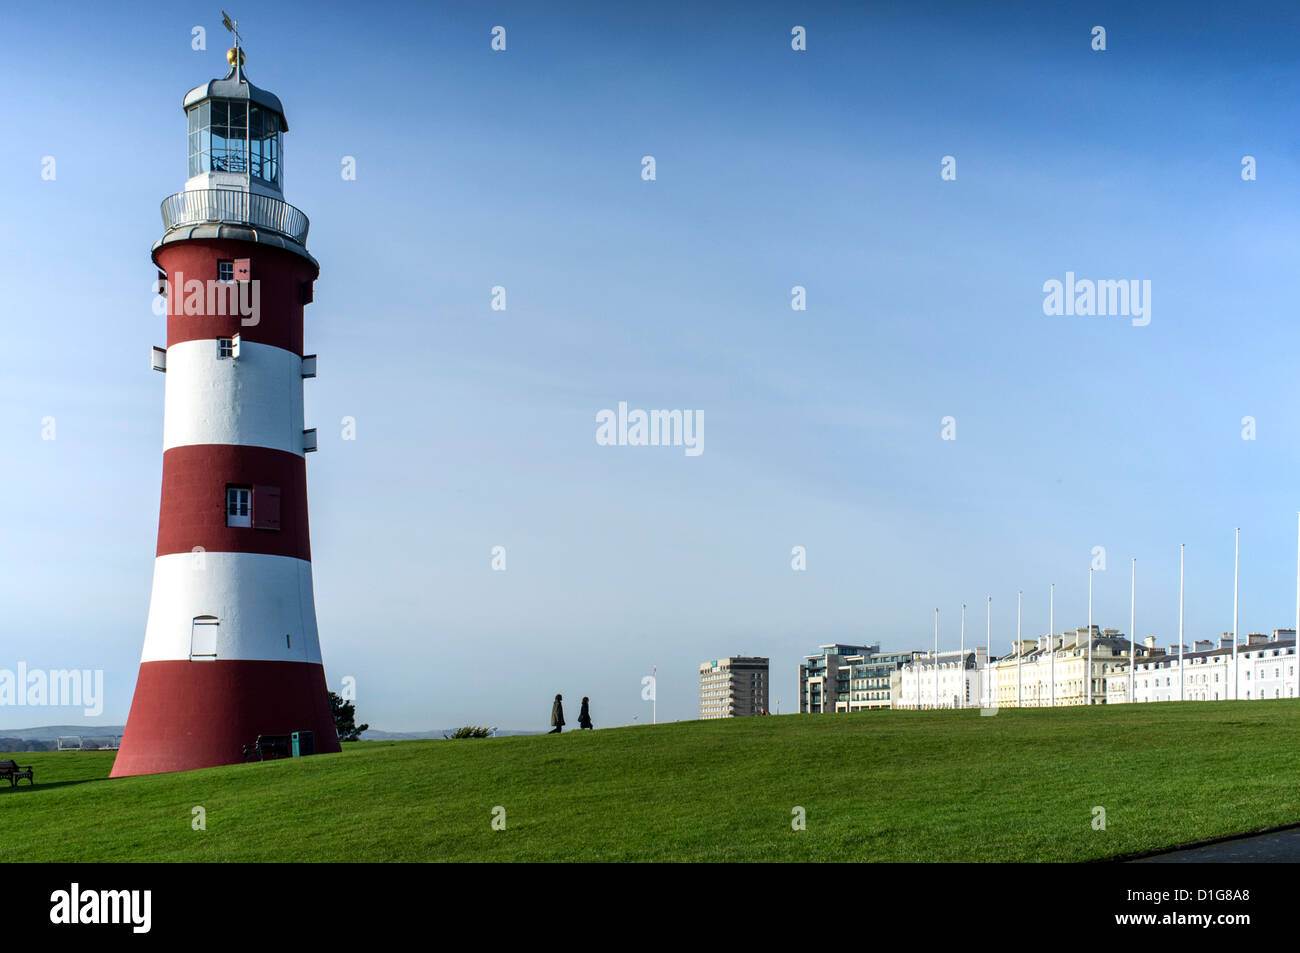 Smeatons Tower, The Hoe, Plymouth, Devon, UKlandscap Stock Photo